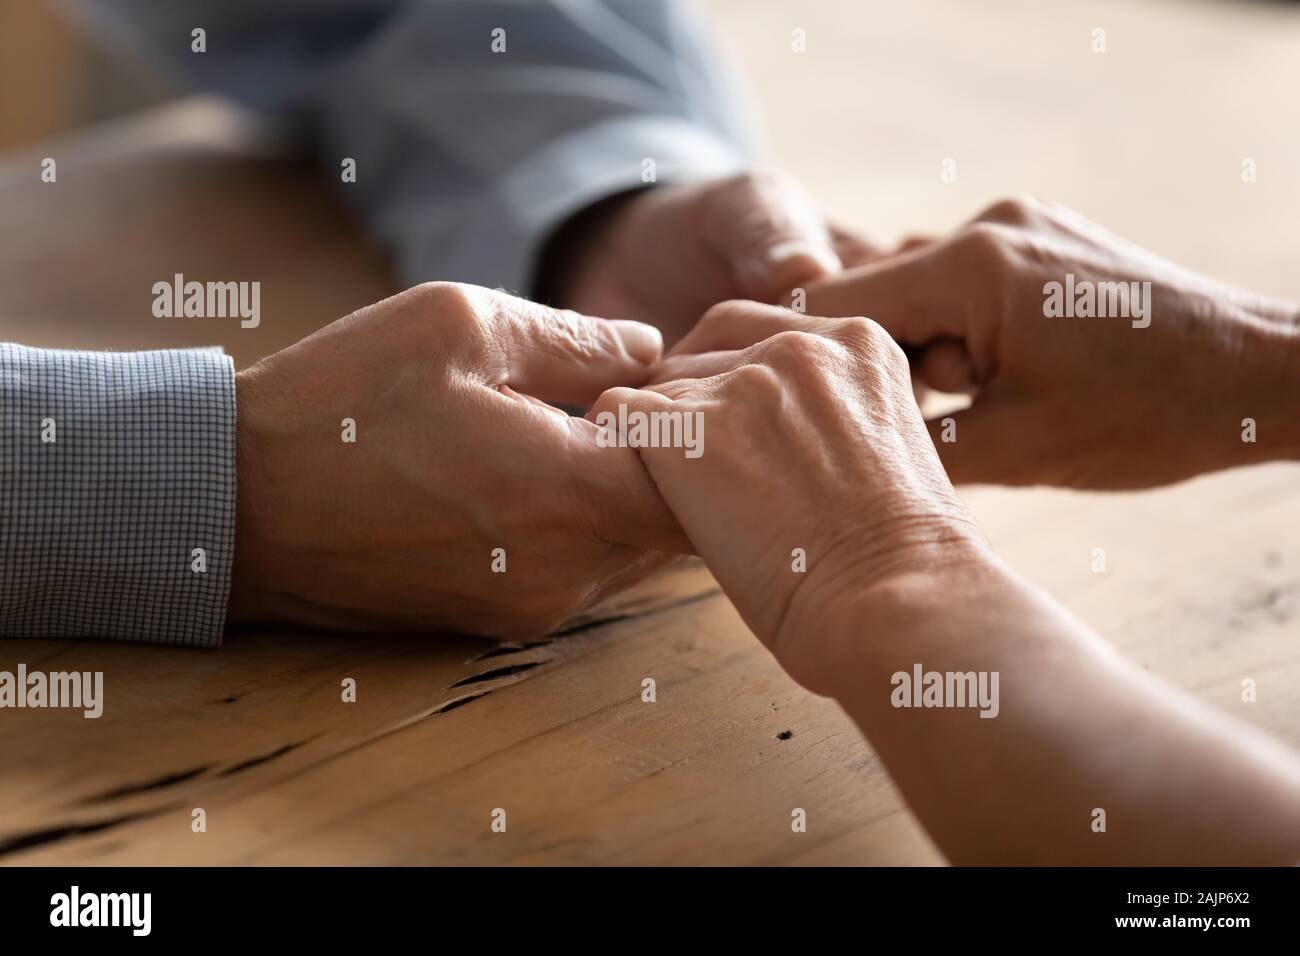 Older couple holding hands close up view Stock Photo